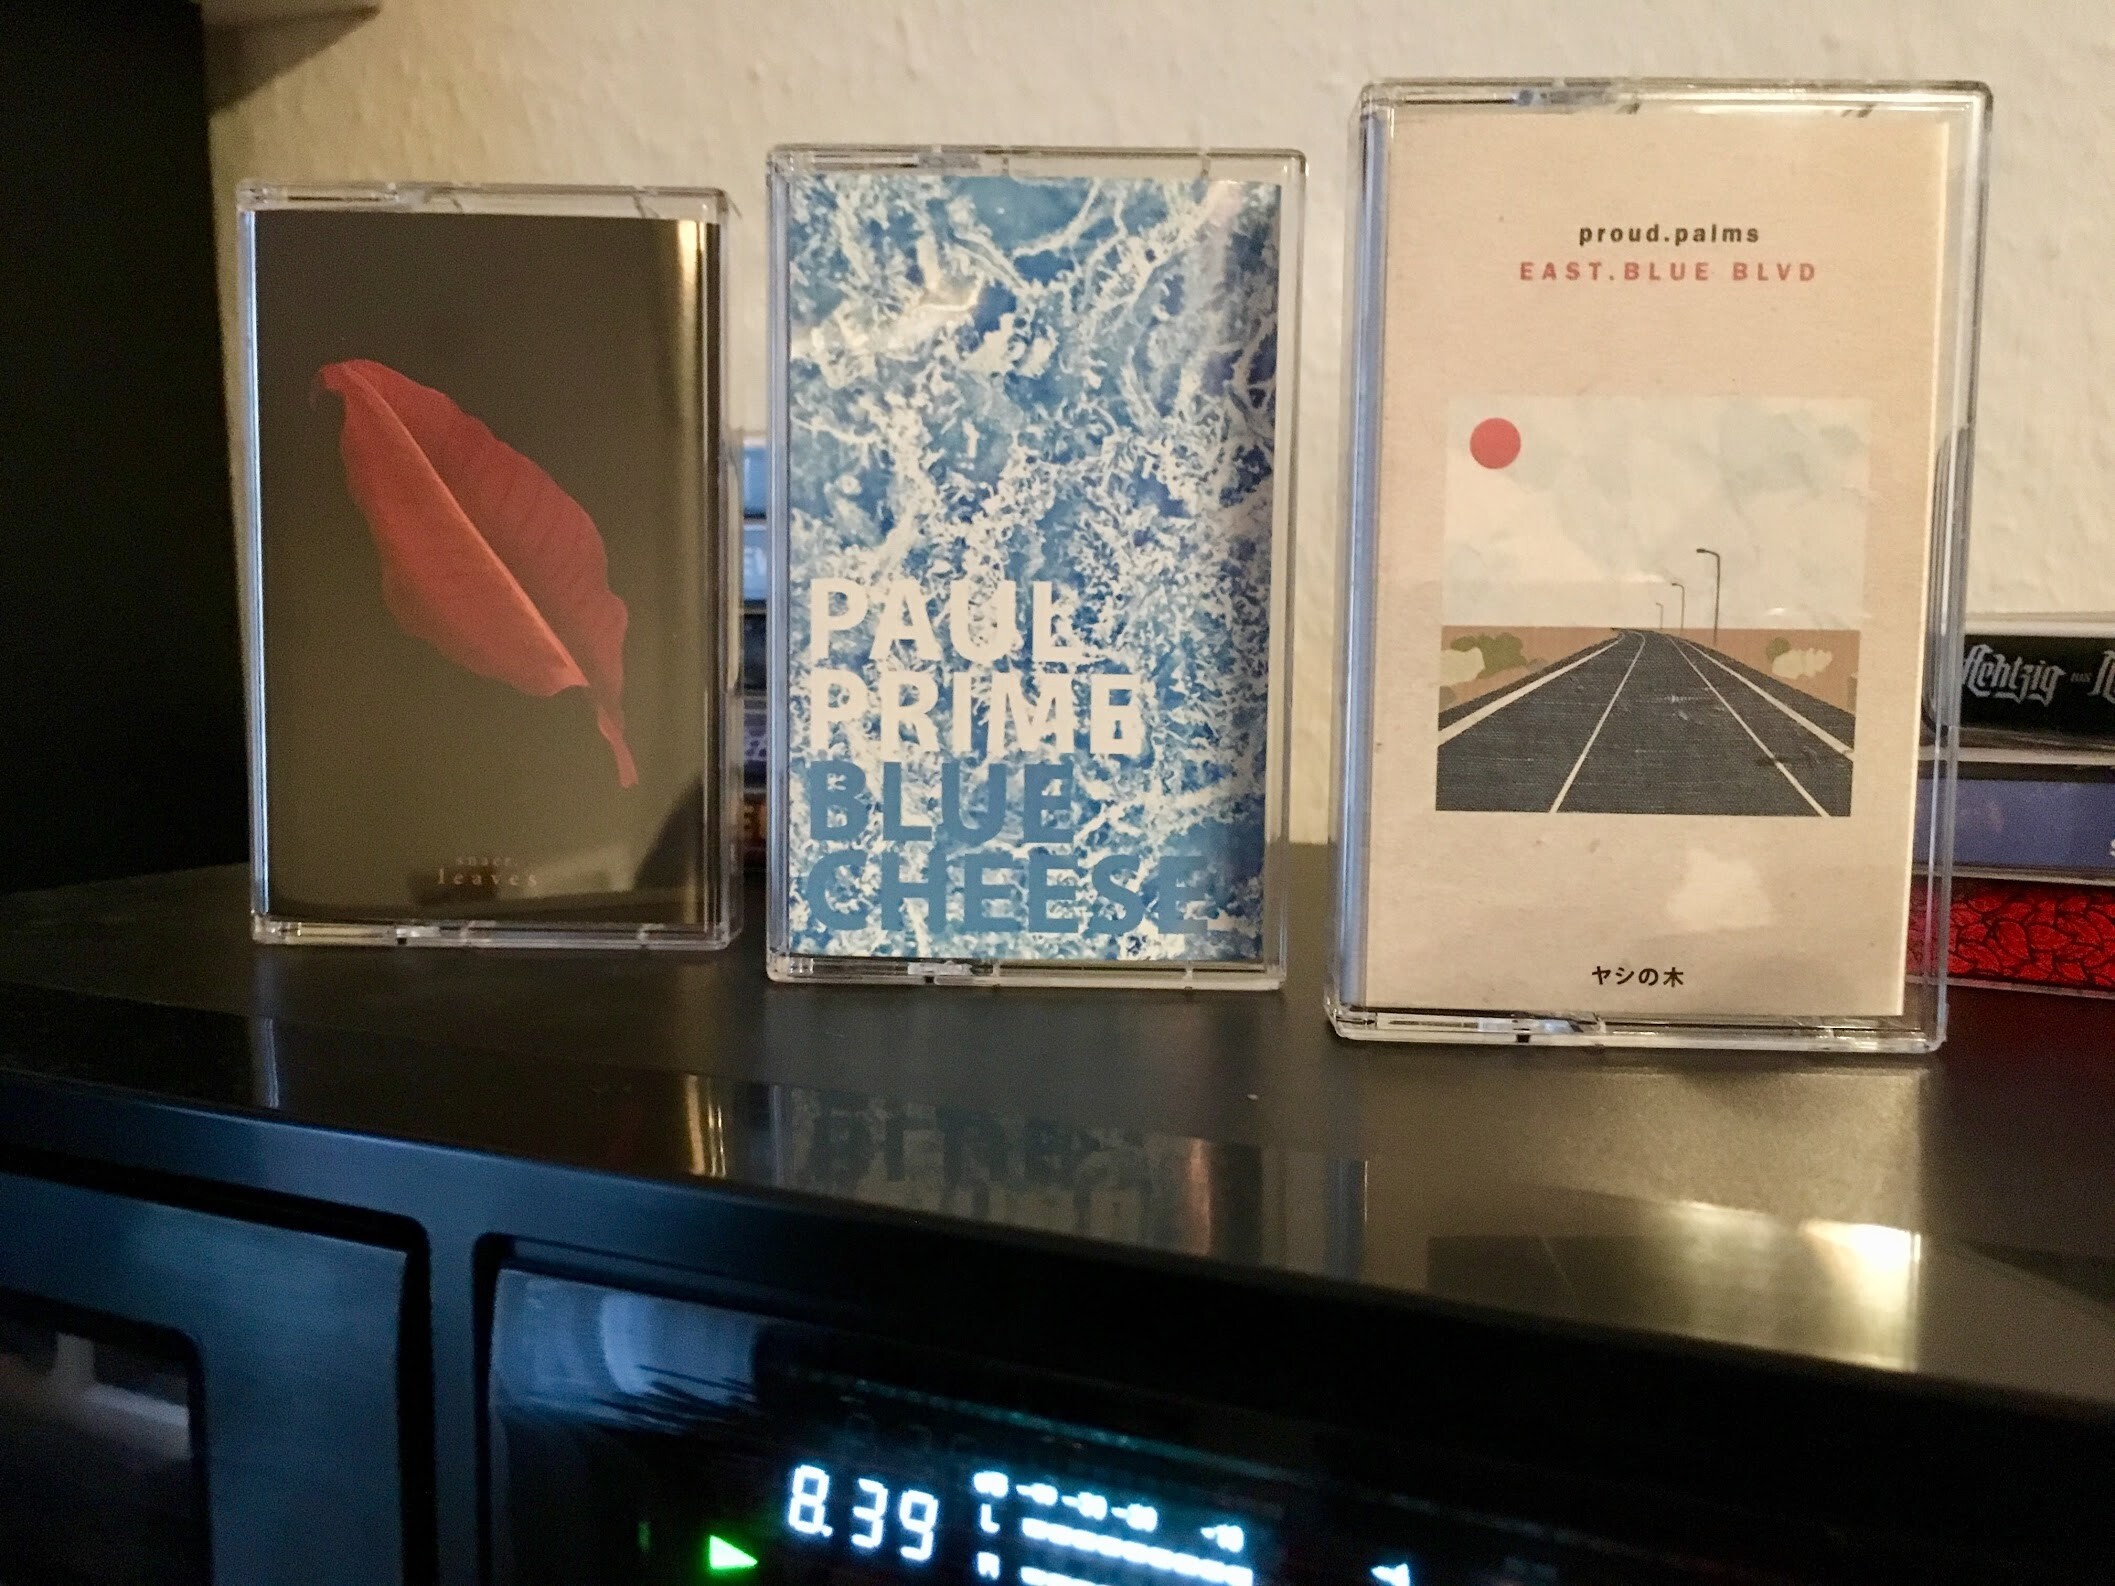 proud.palms, Paul Prime, snaer - The Tapeinvader Edition